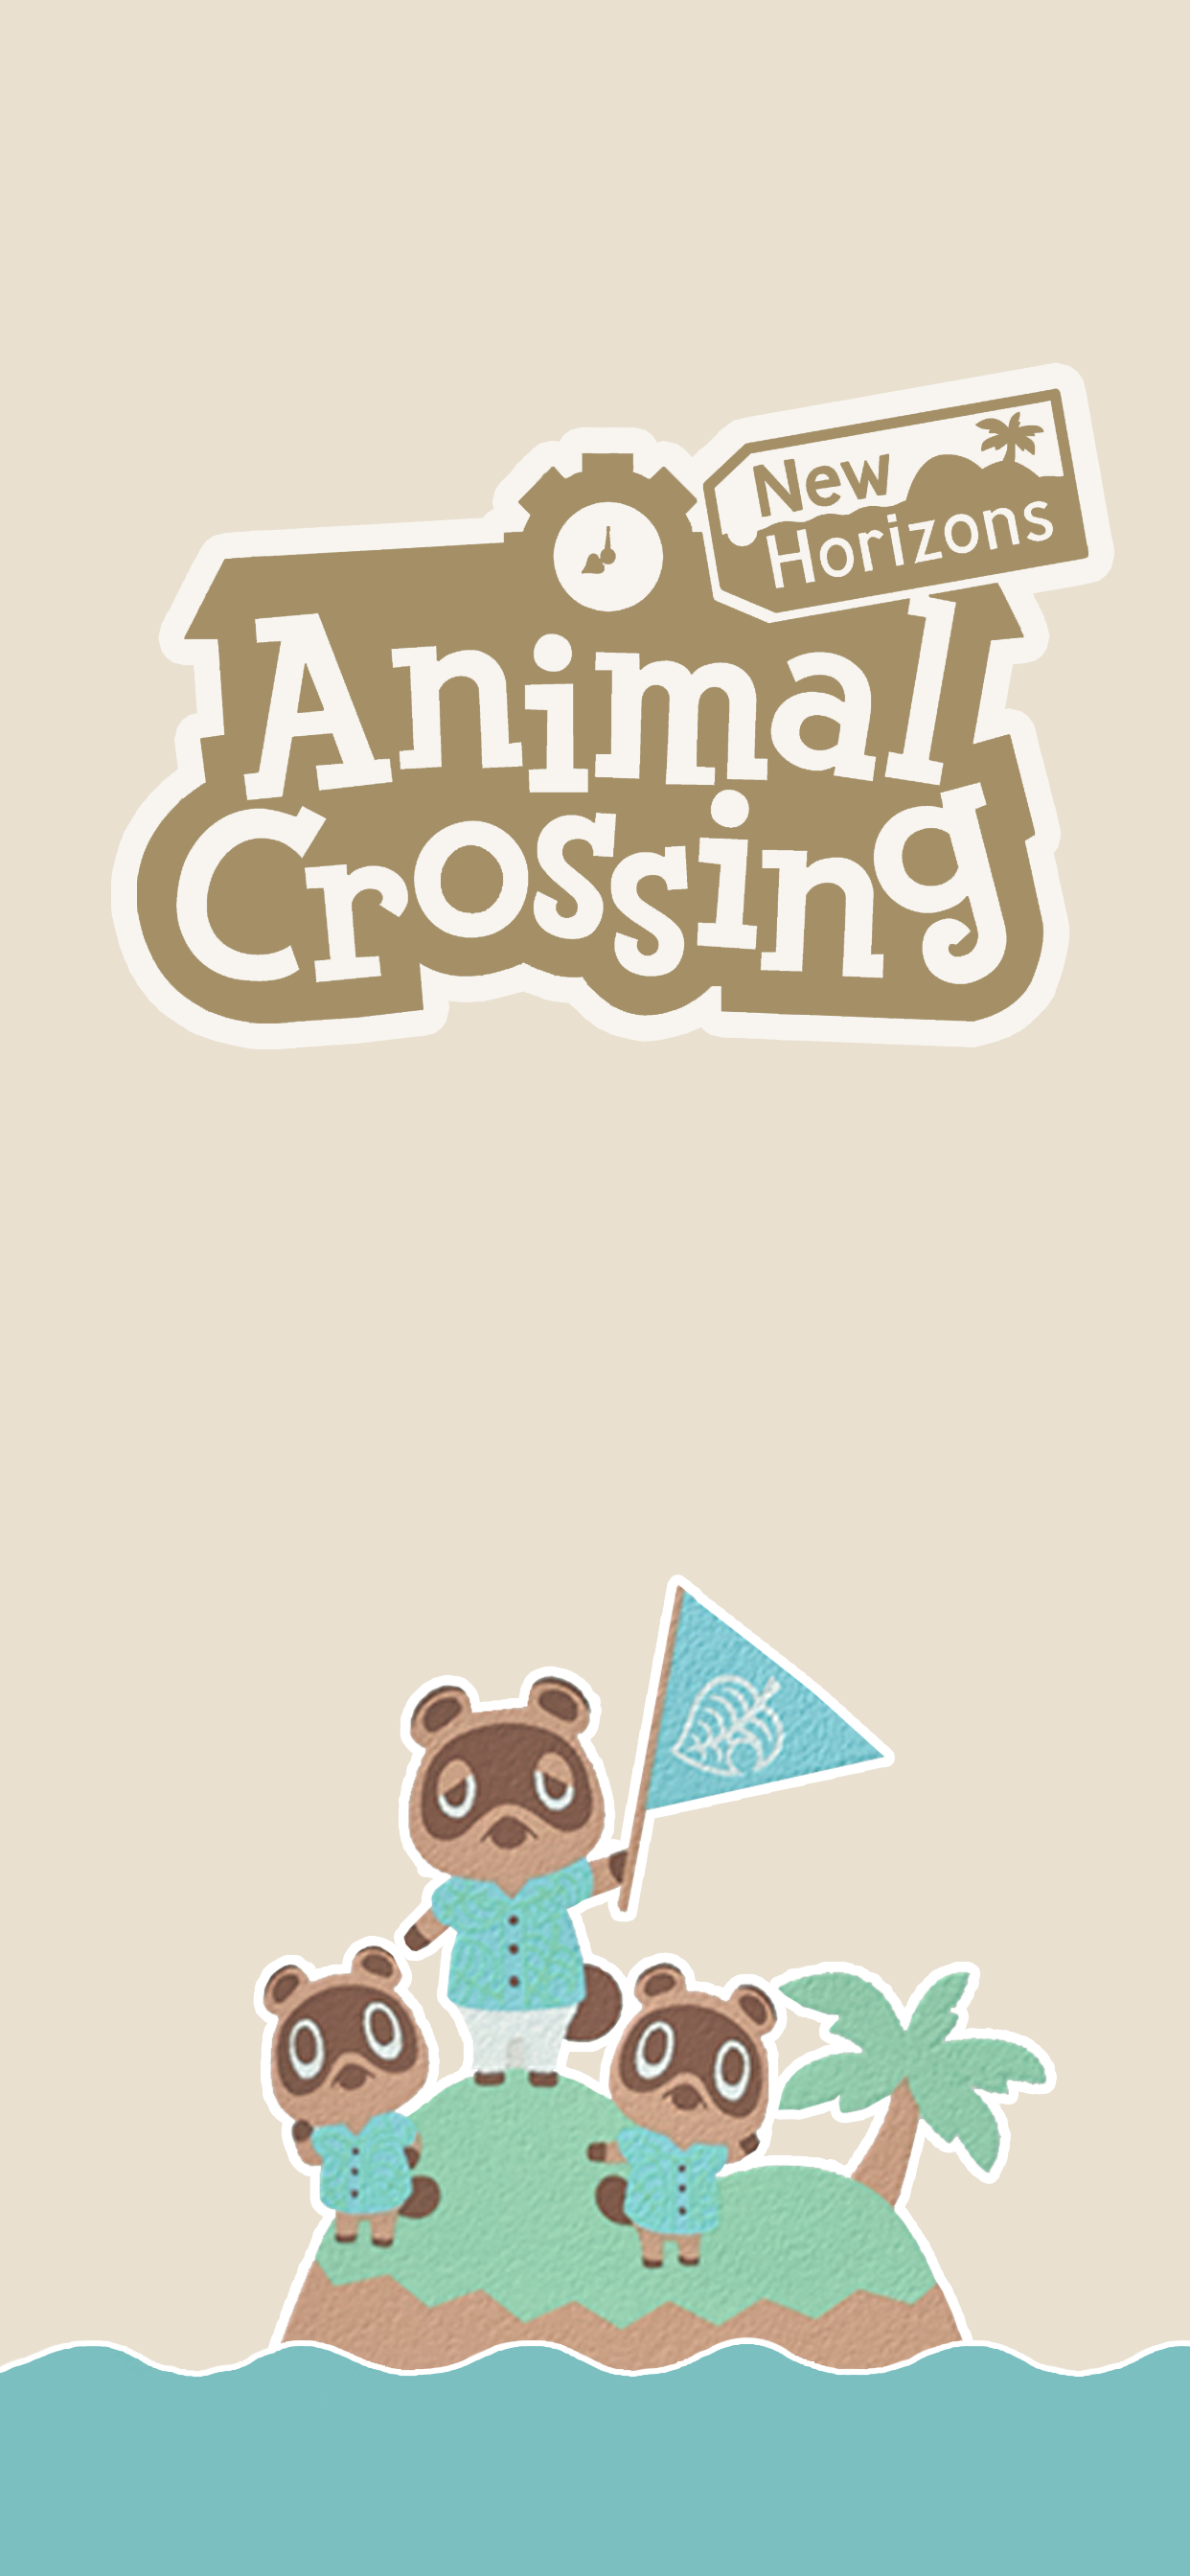 Animal Crossing For iPhone Wallpapers - Wallpaper Cave